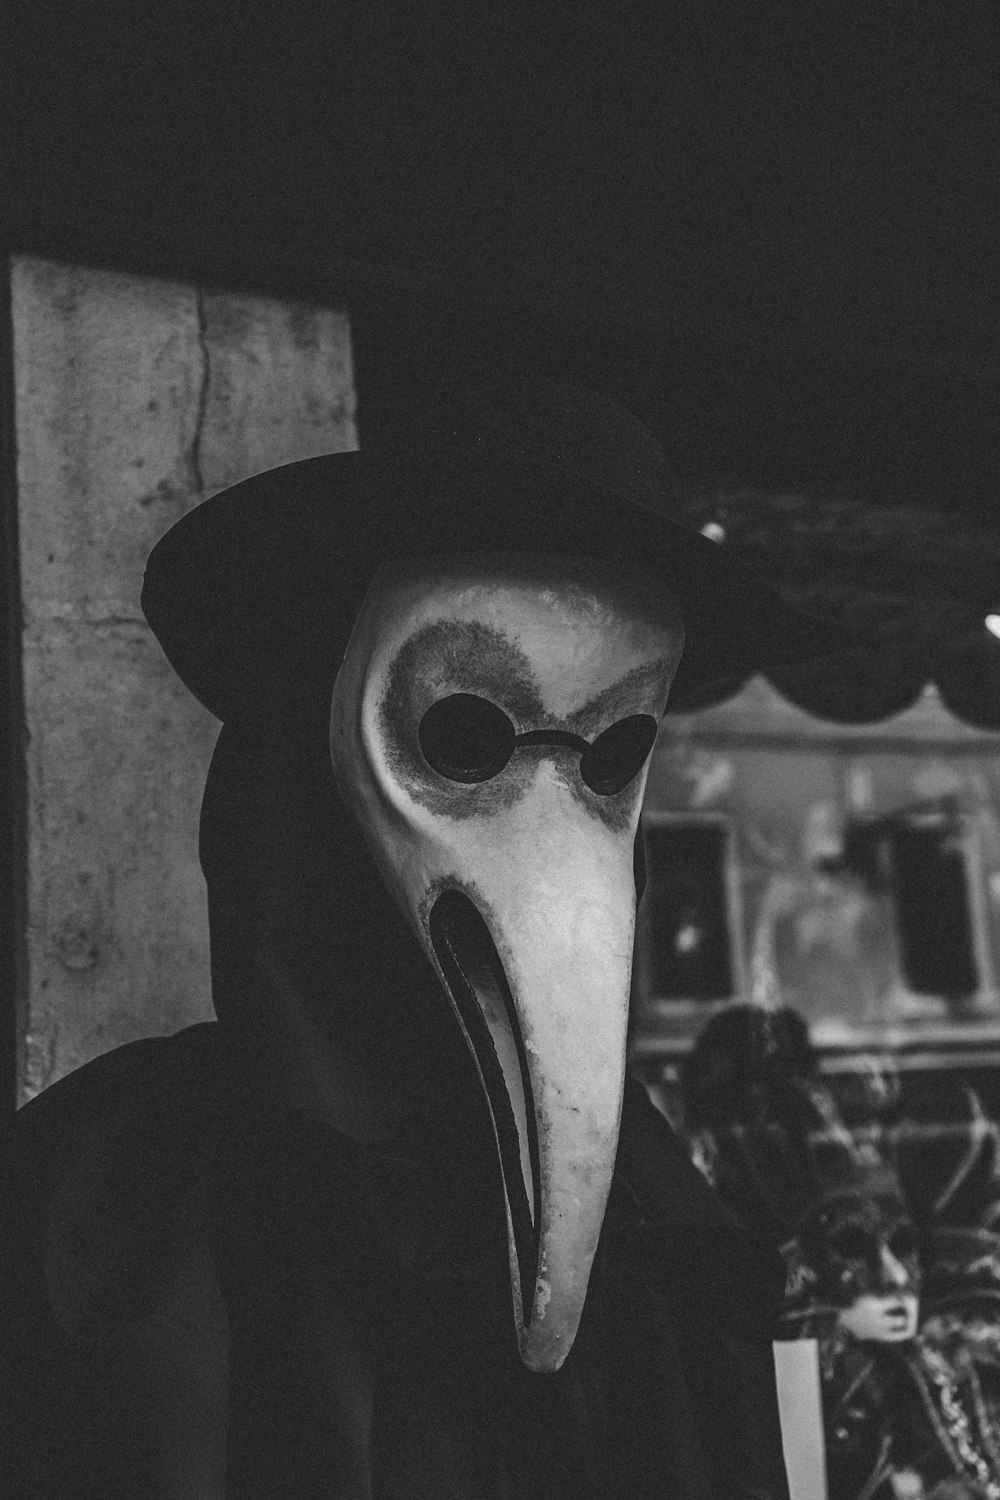 White Mask Pictures  Download Free Images on Unsplash